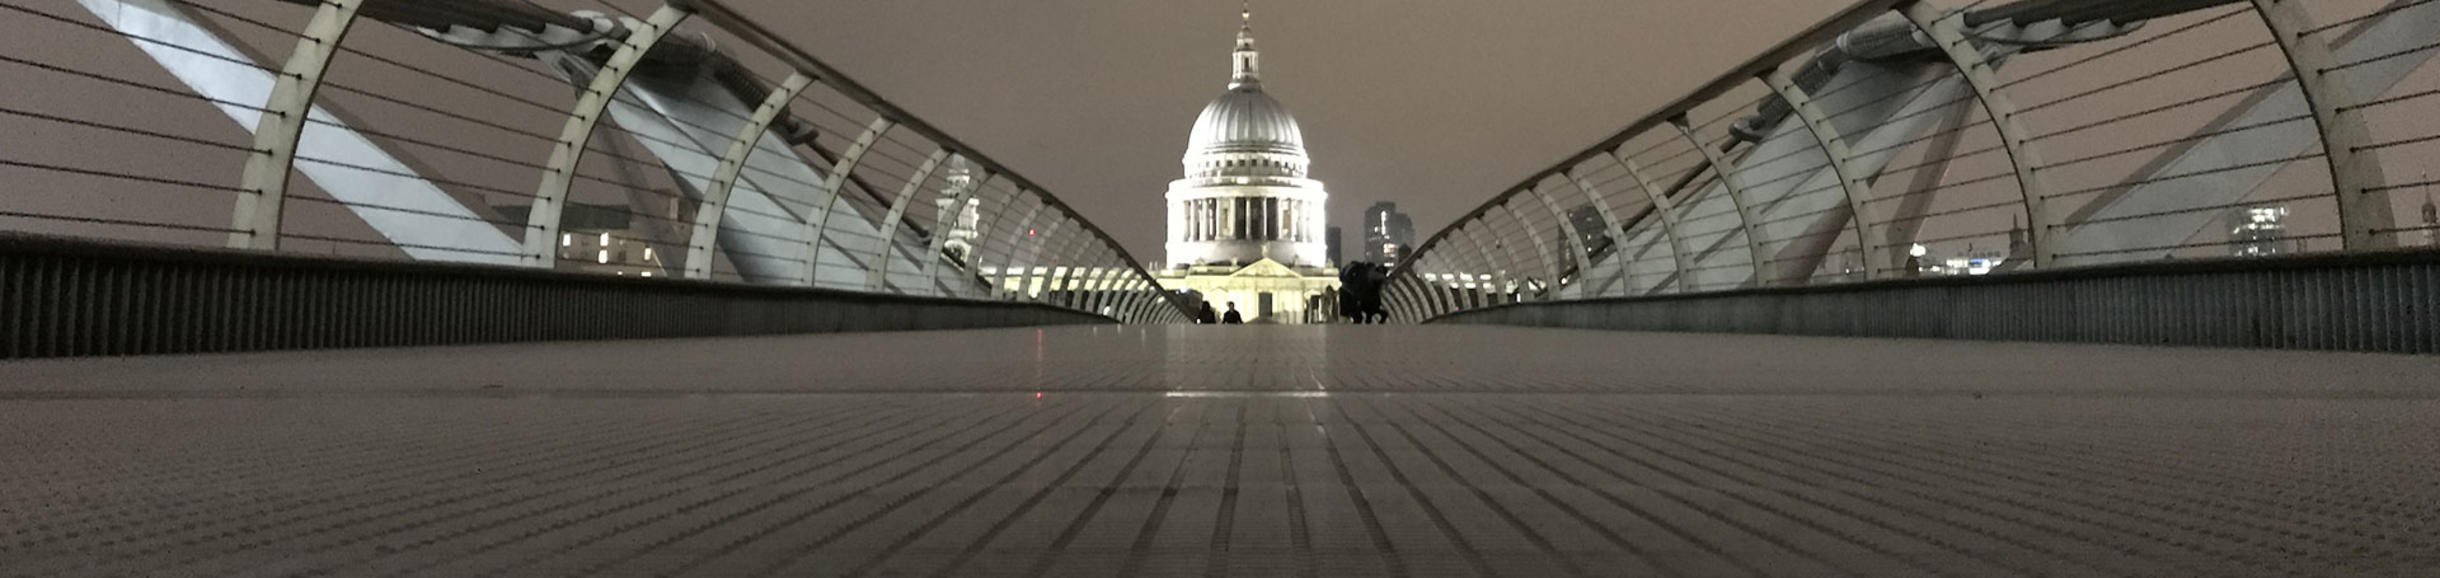 Photo of Millennium Bridge with Saint Paul's Cathedral in the distance